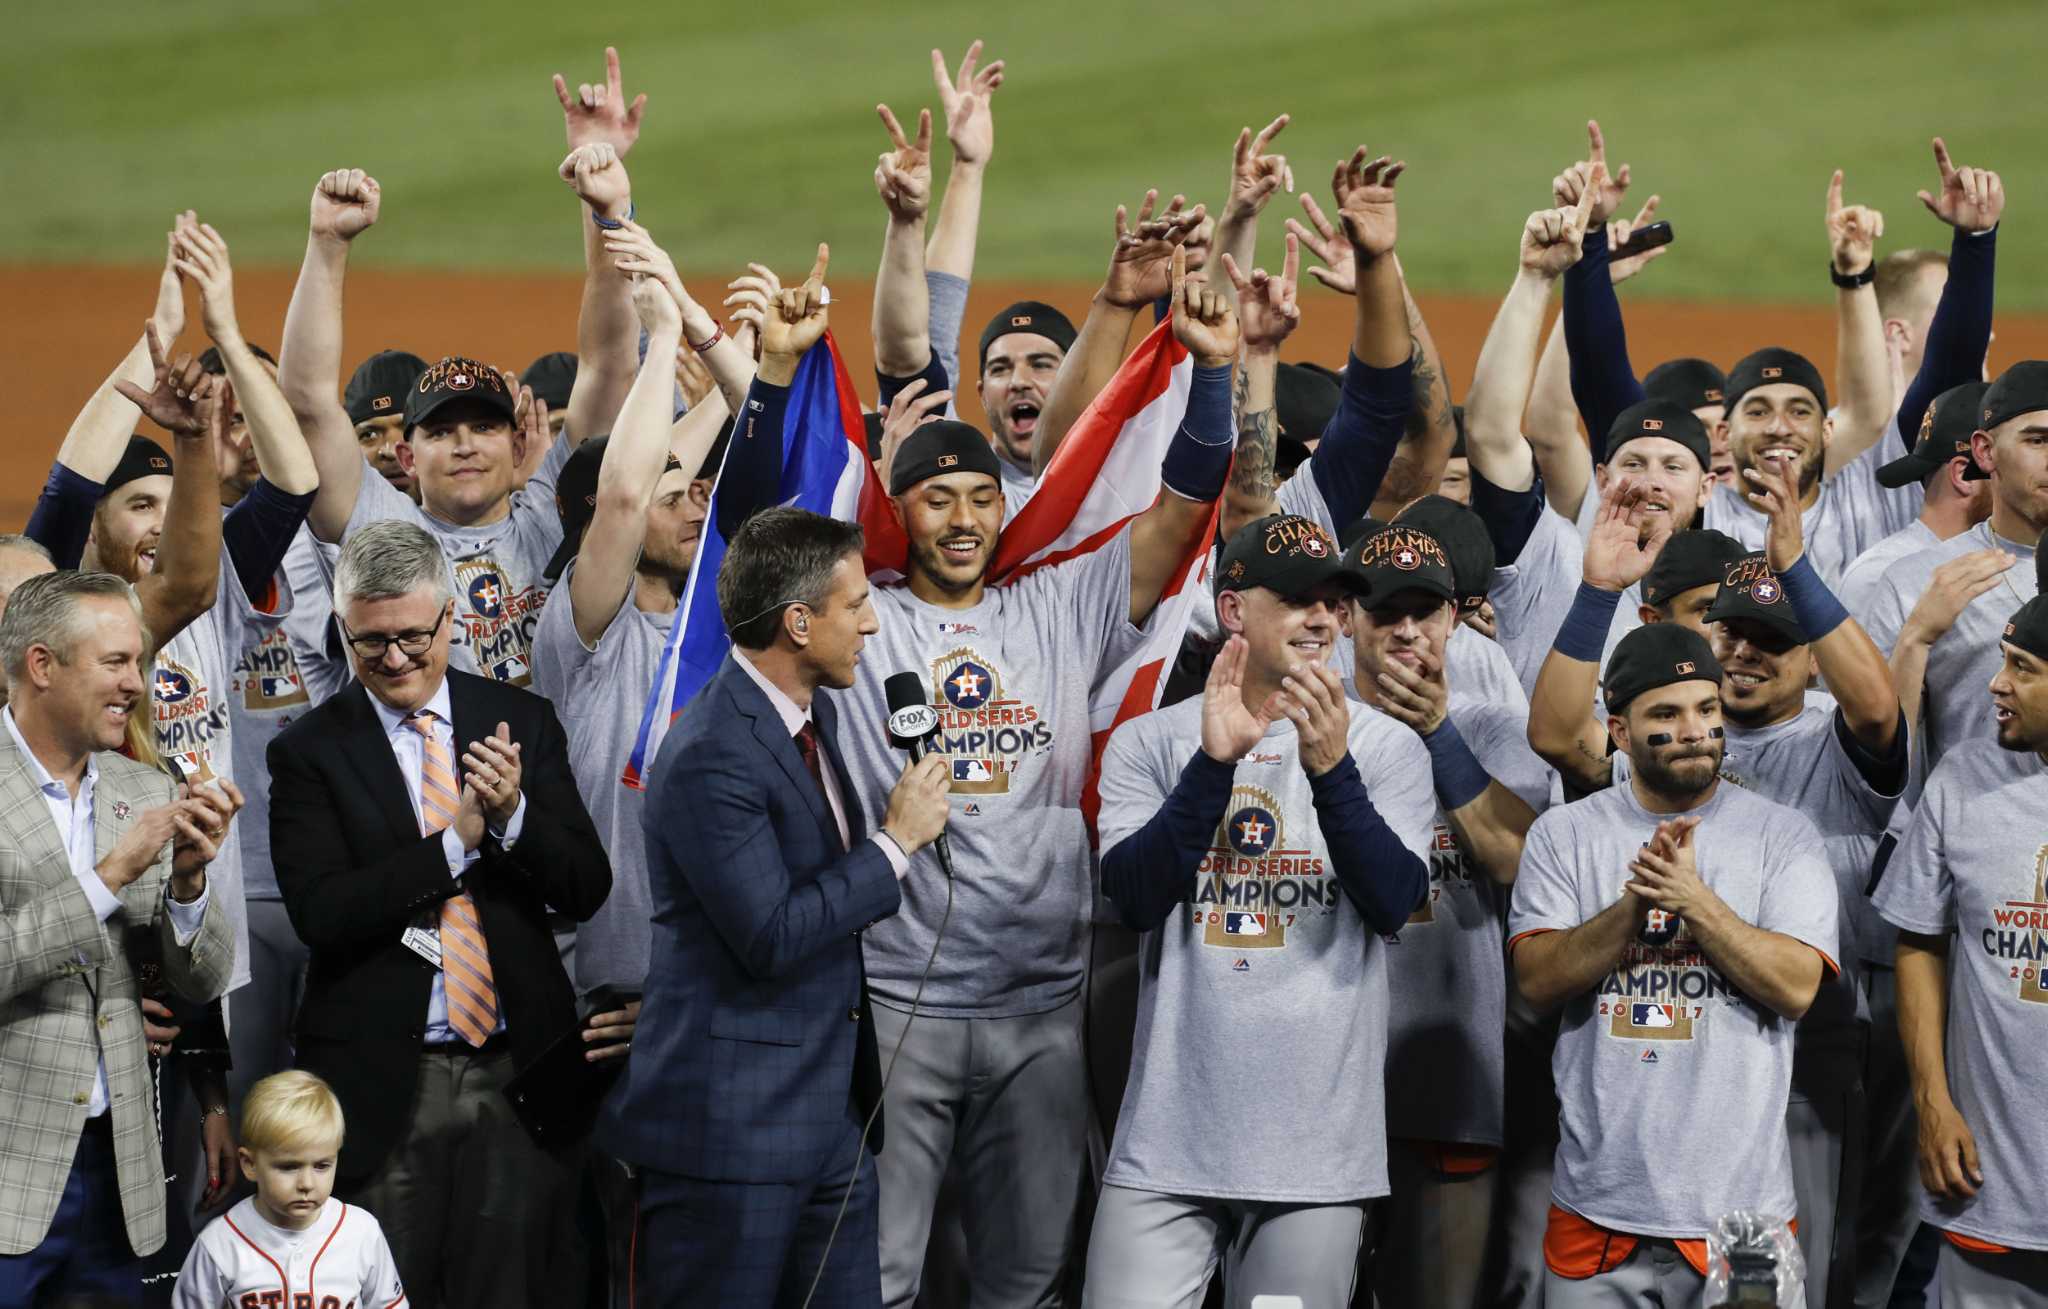 Houston Astros Lead the Best-of-Five Playoff Series by a 2-0